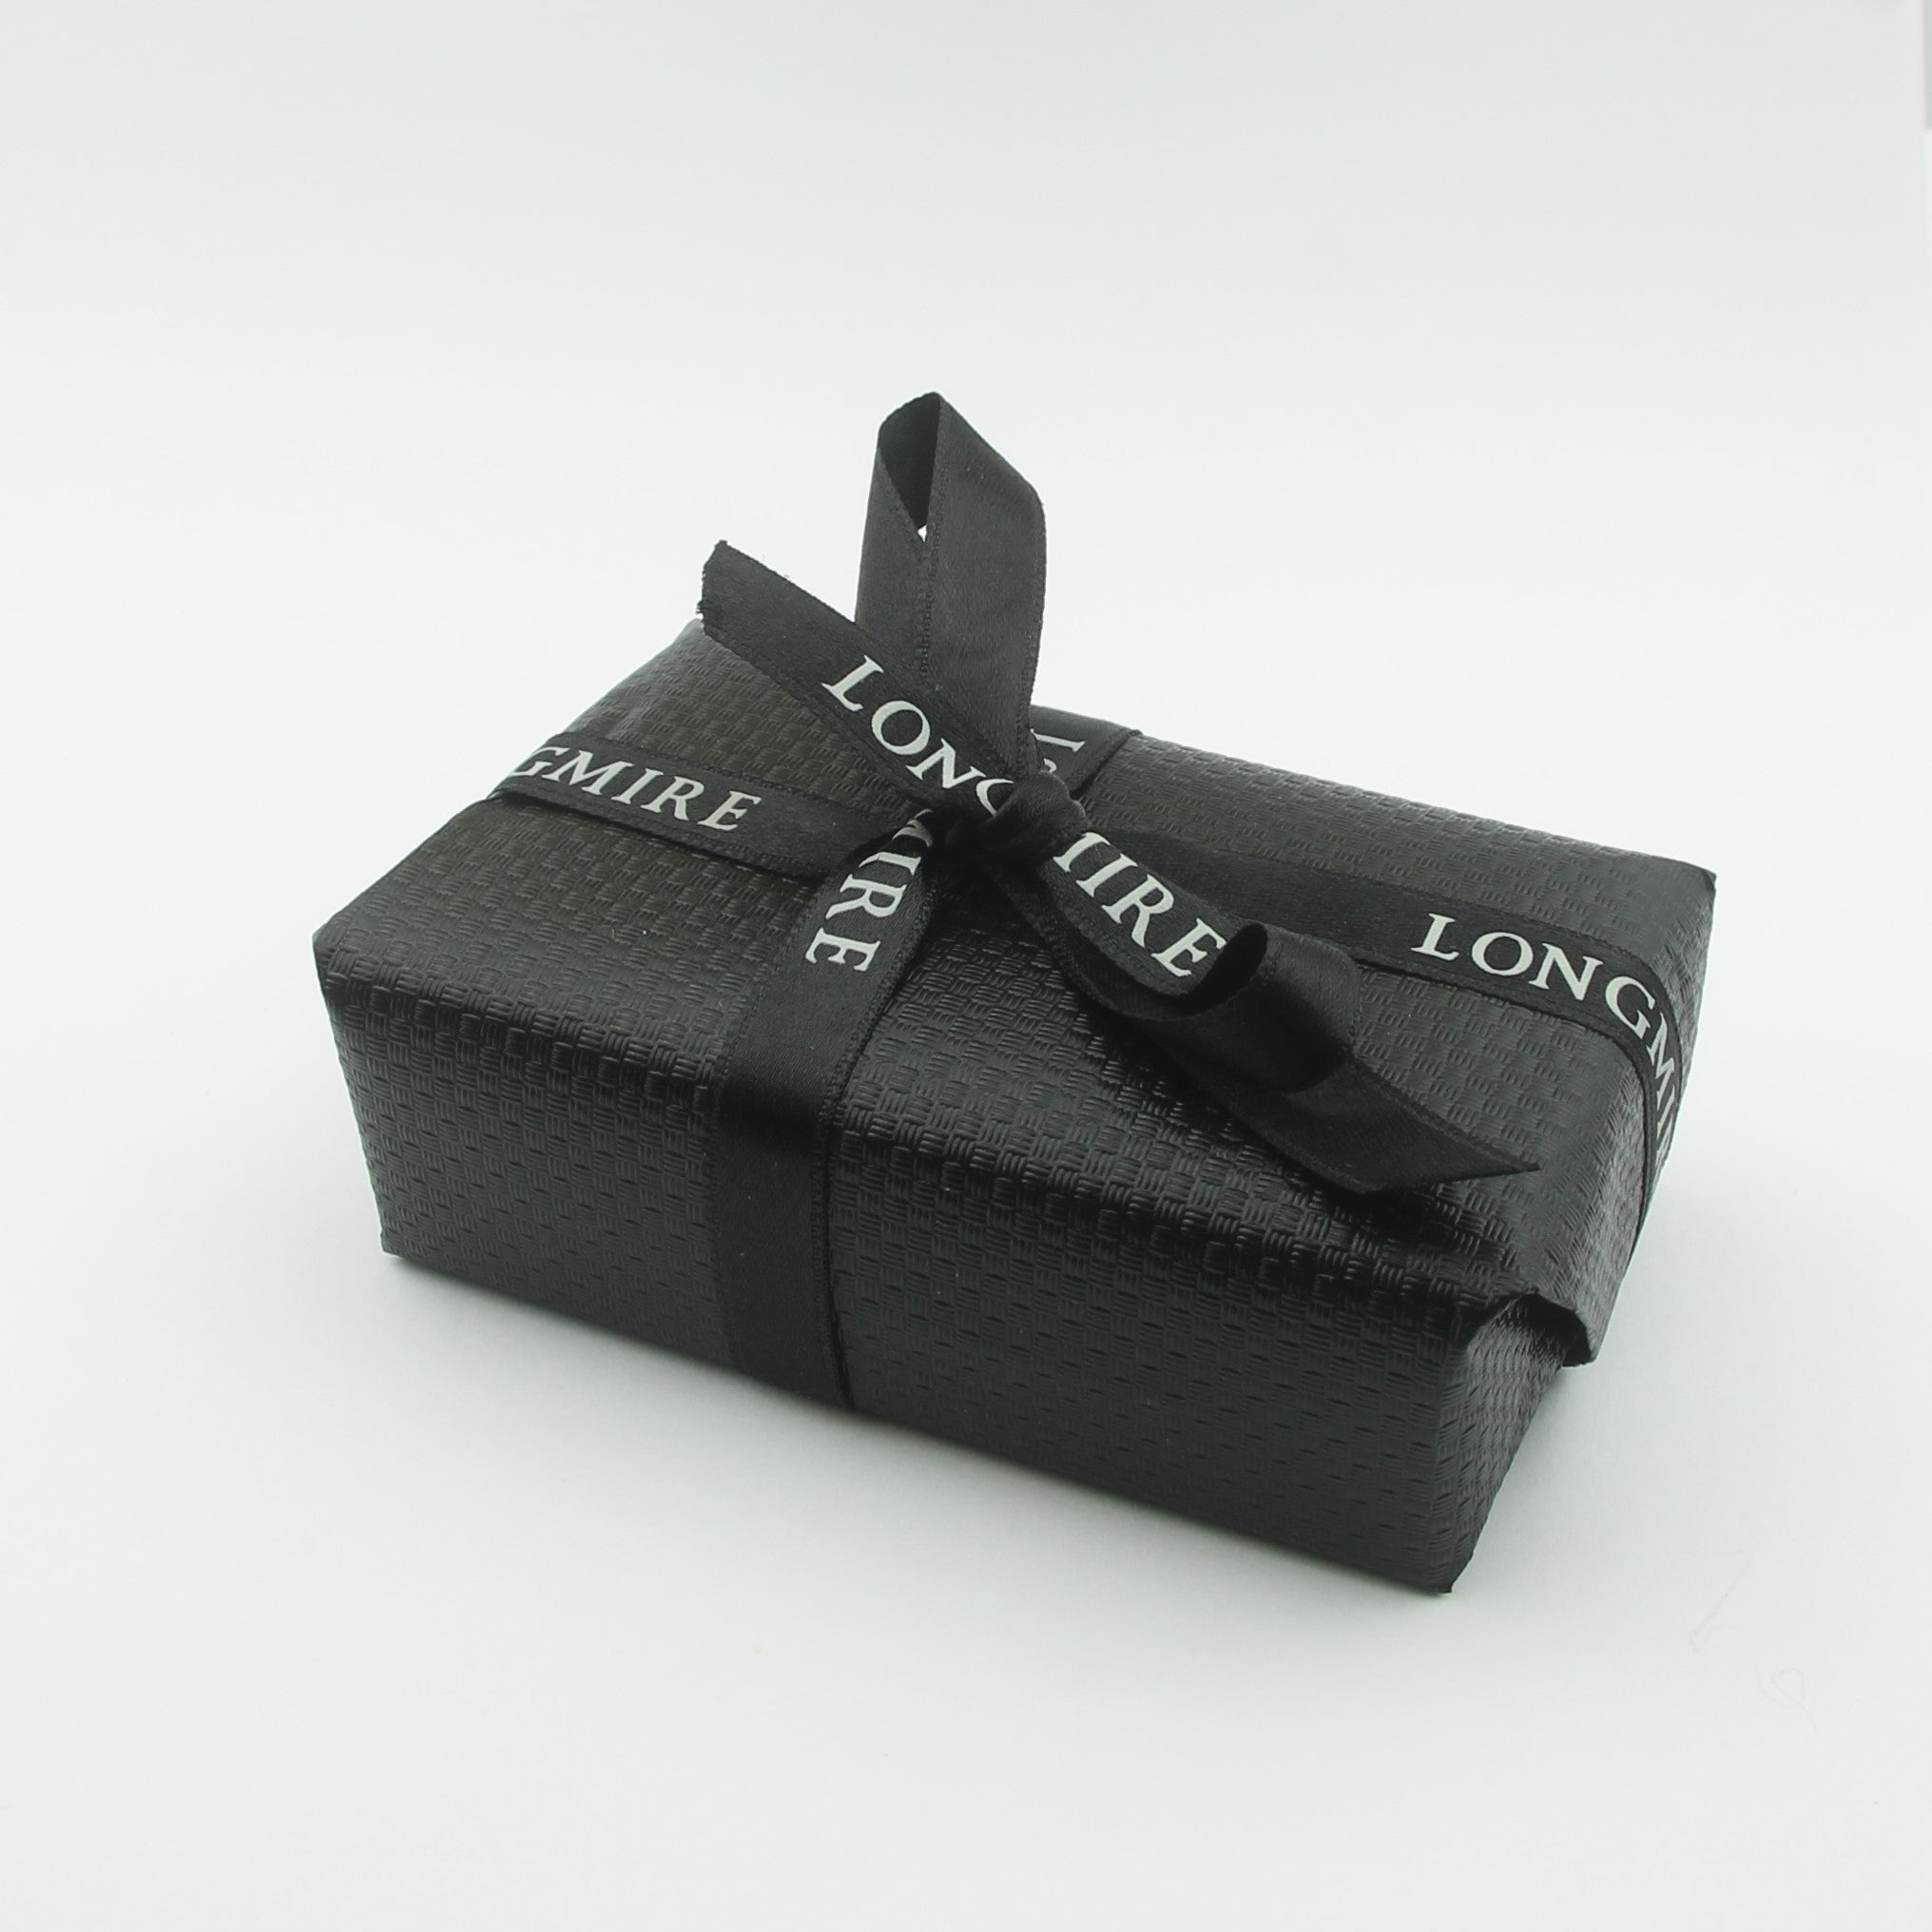 Cufflink box gift wrapped